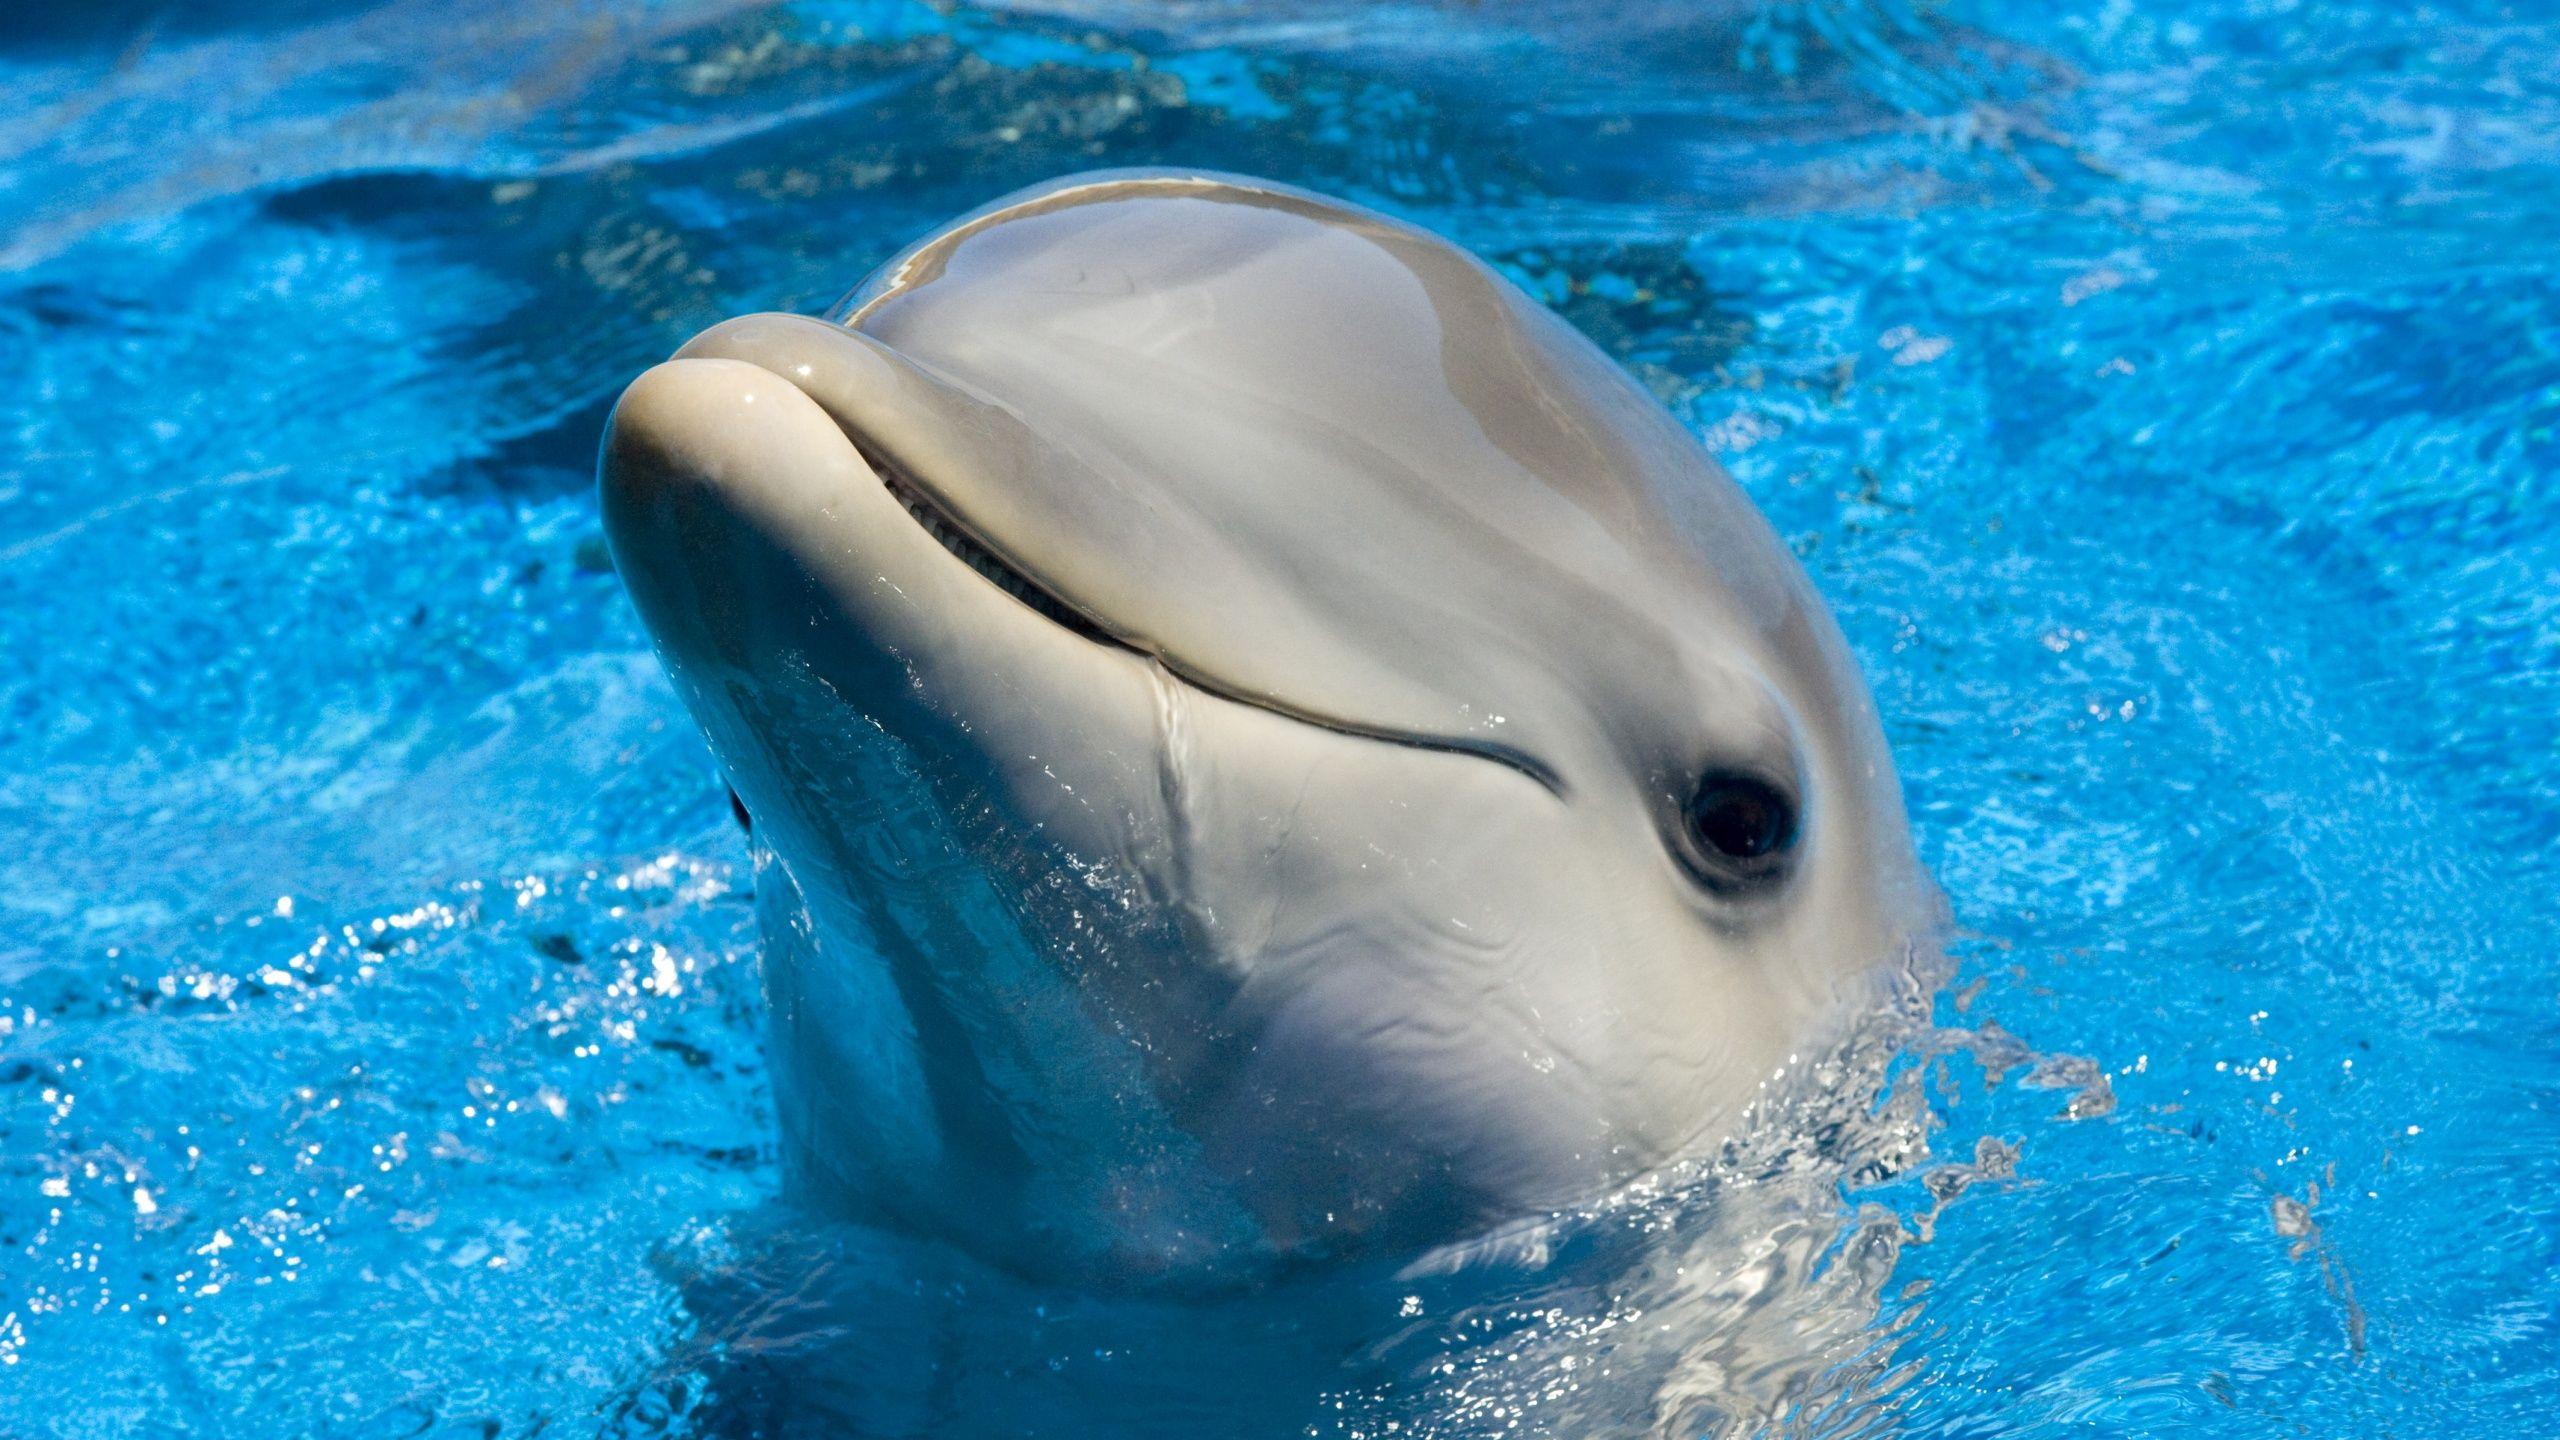 Cute dolphin Wallpaper. Dolphins, Dolphins animal, Deadly animals